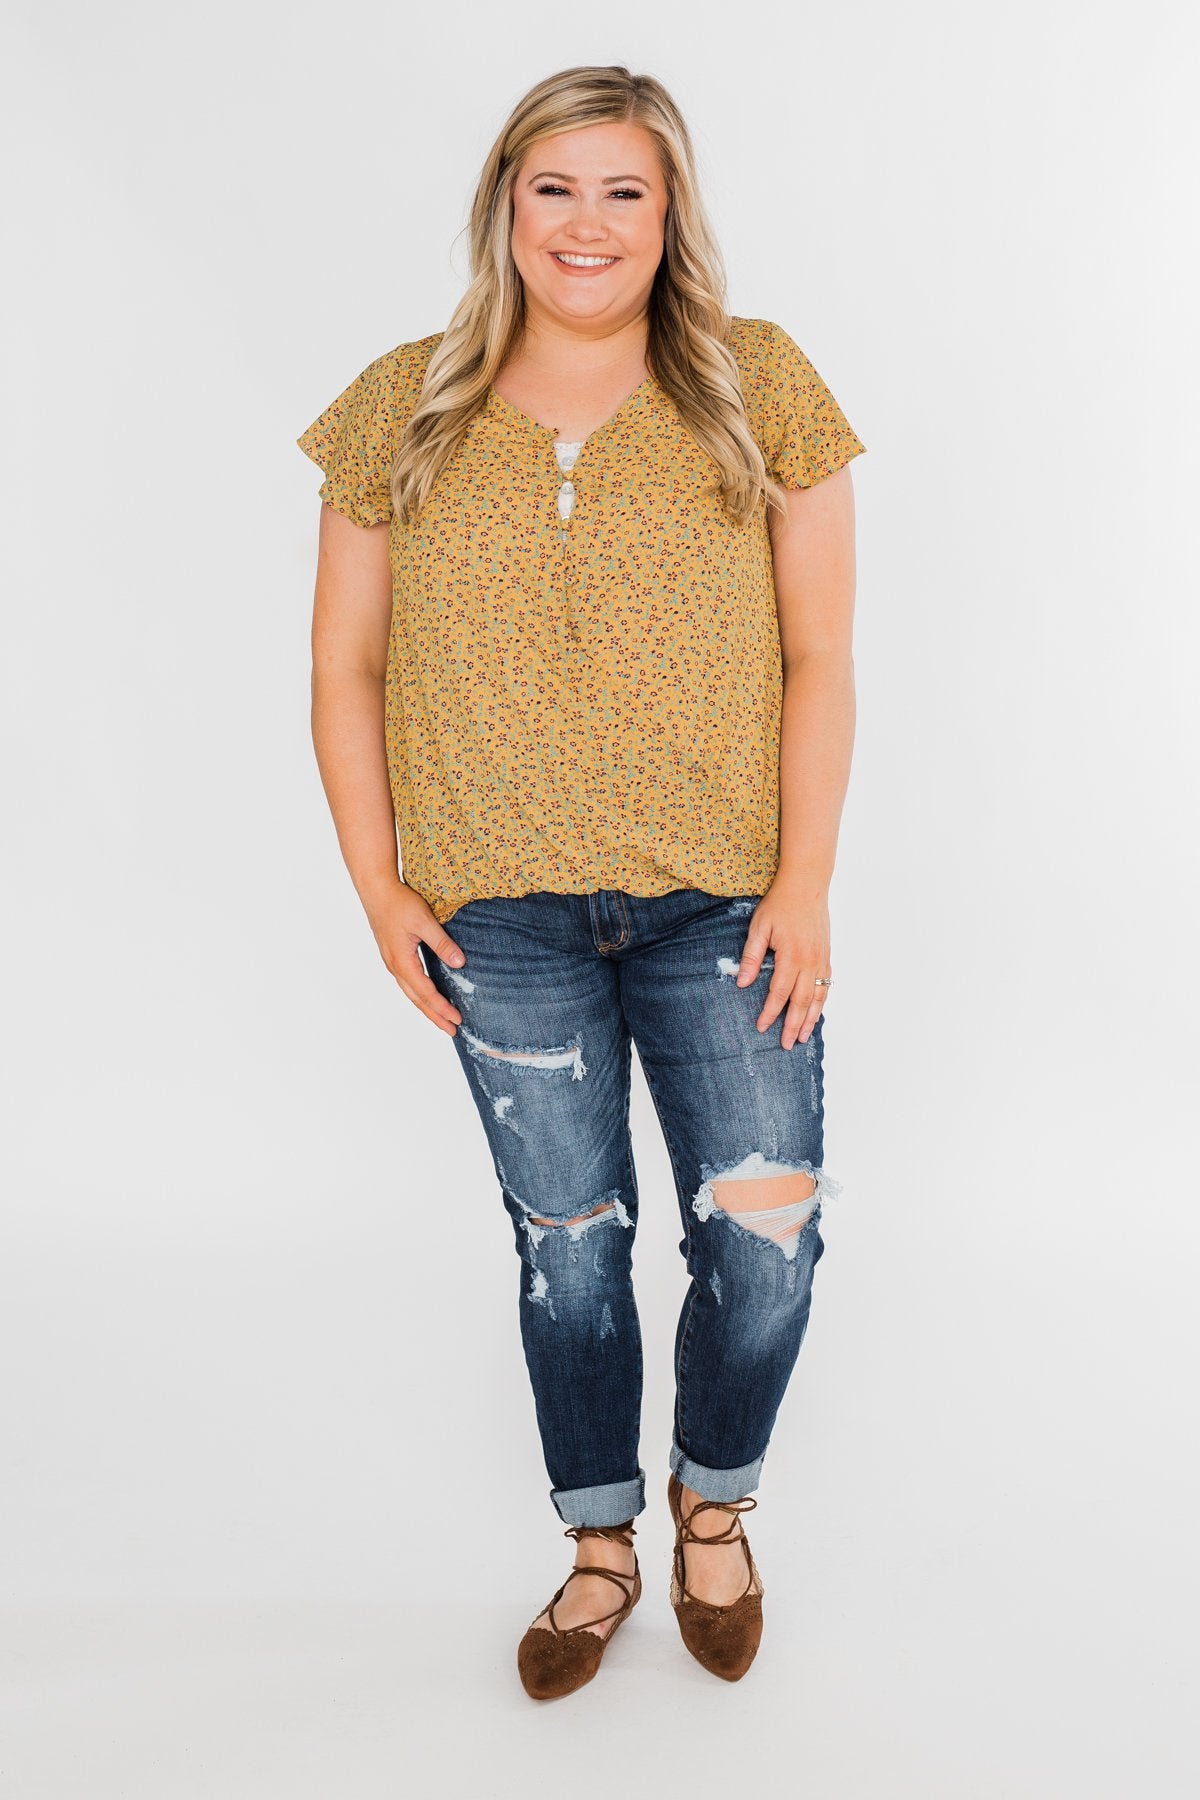 Moving On Floral Botton and Wrap Top- Mustard